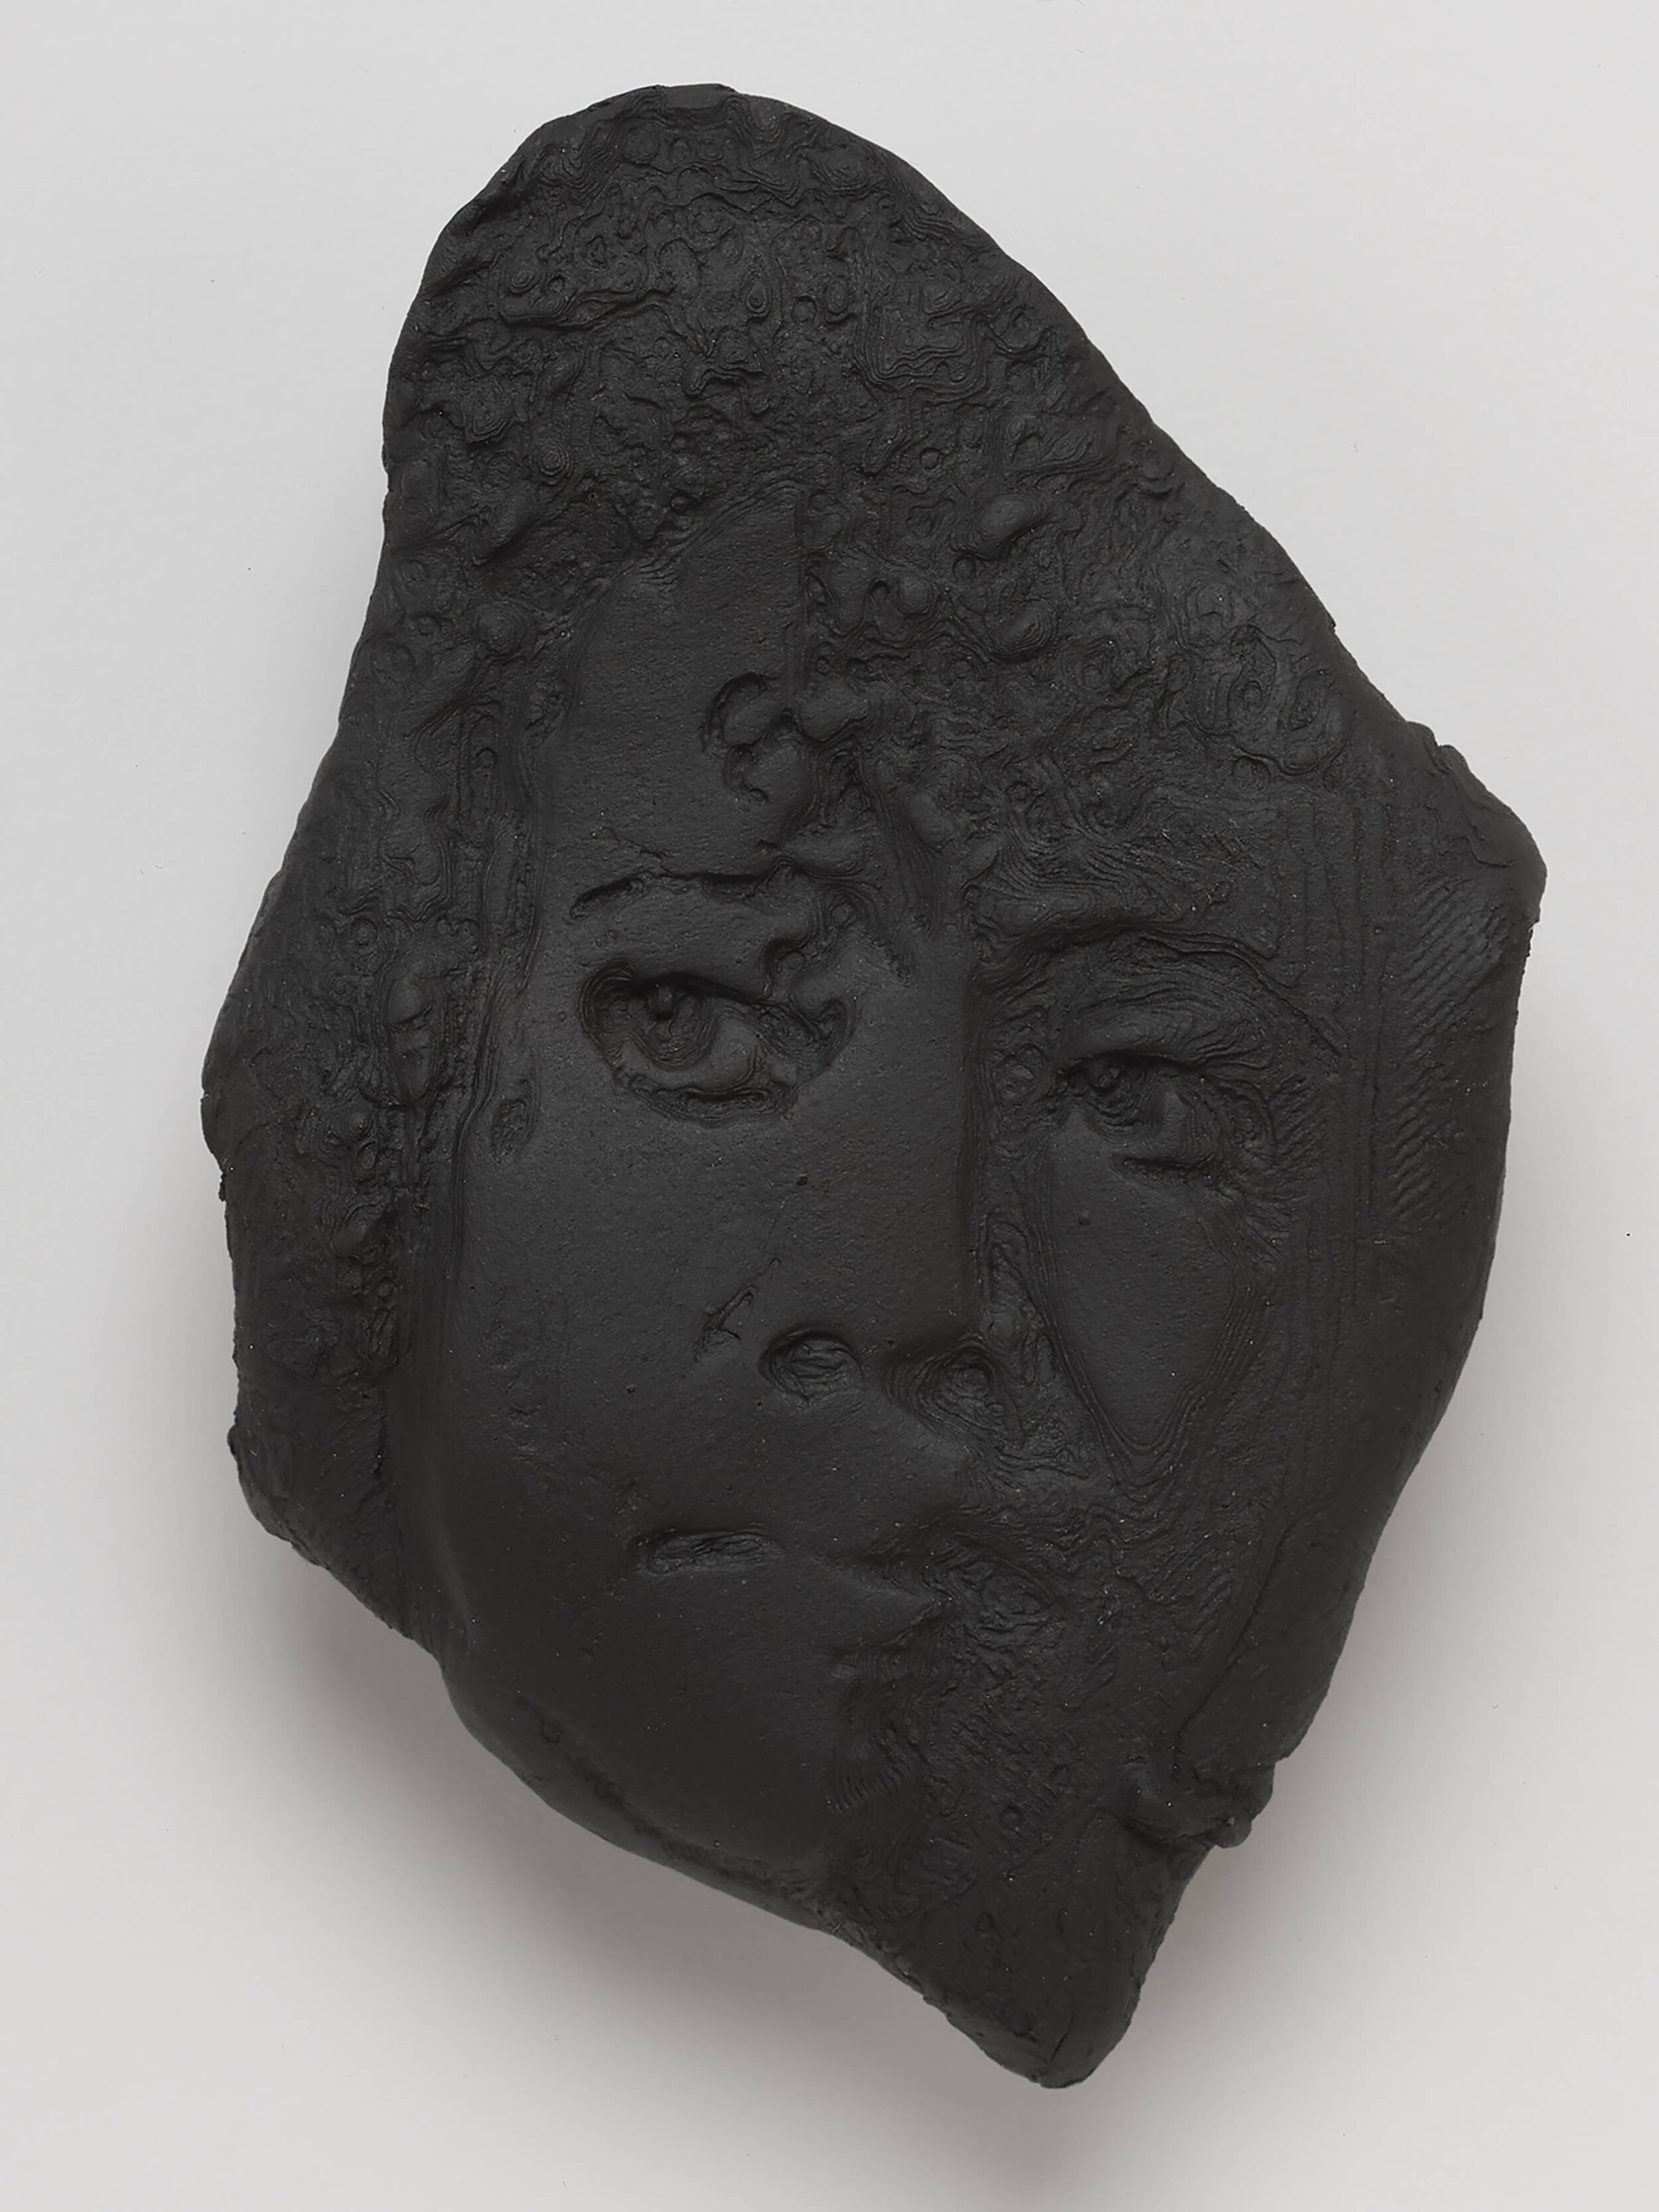  Untitled 15 (Self Portrait), 2020. Cassius Obsidian clay, unique in a series.   4 ½  x 3 ½  inches.  Edition of 3.  